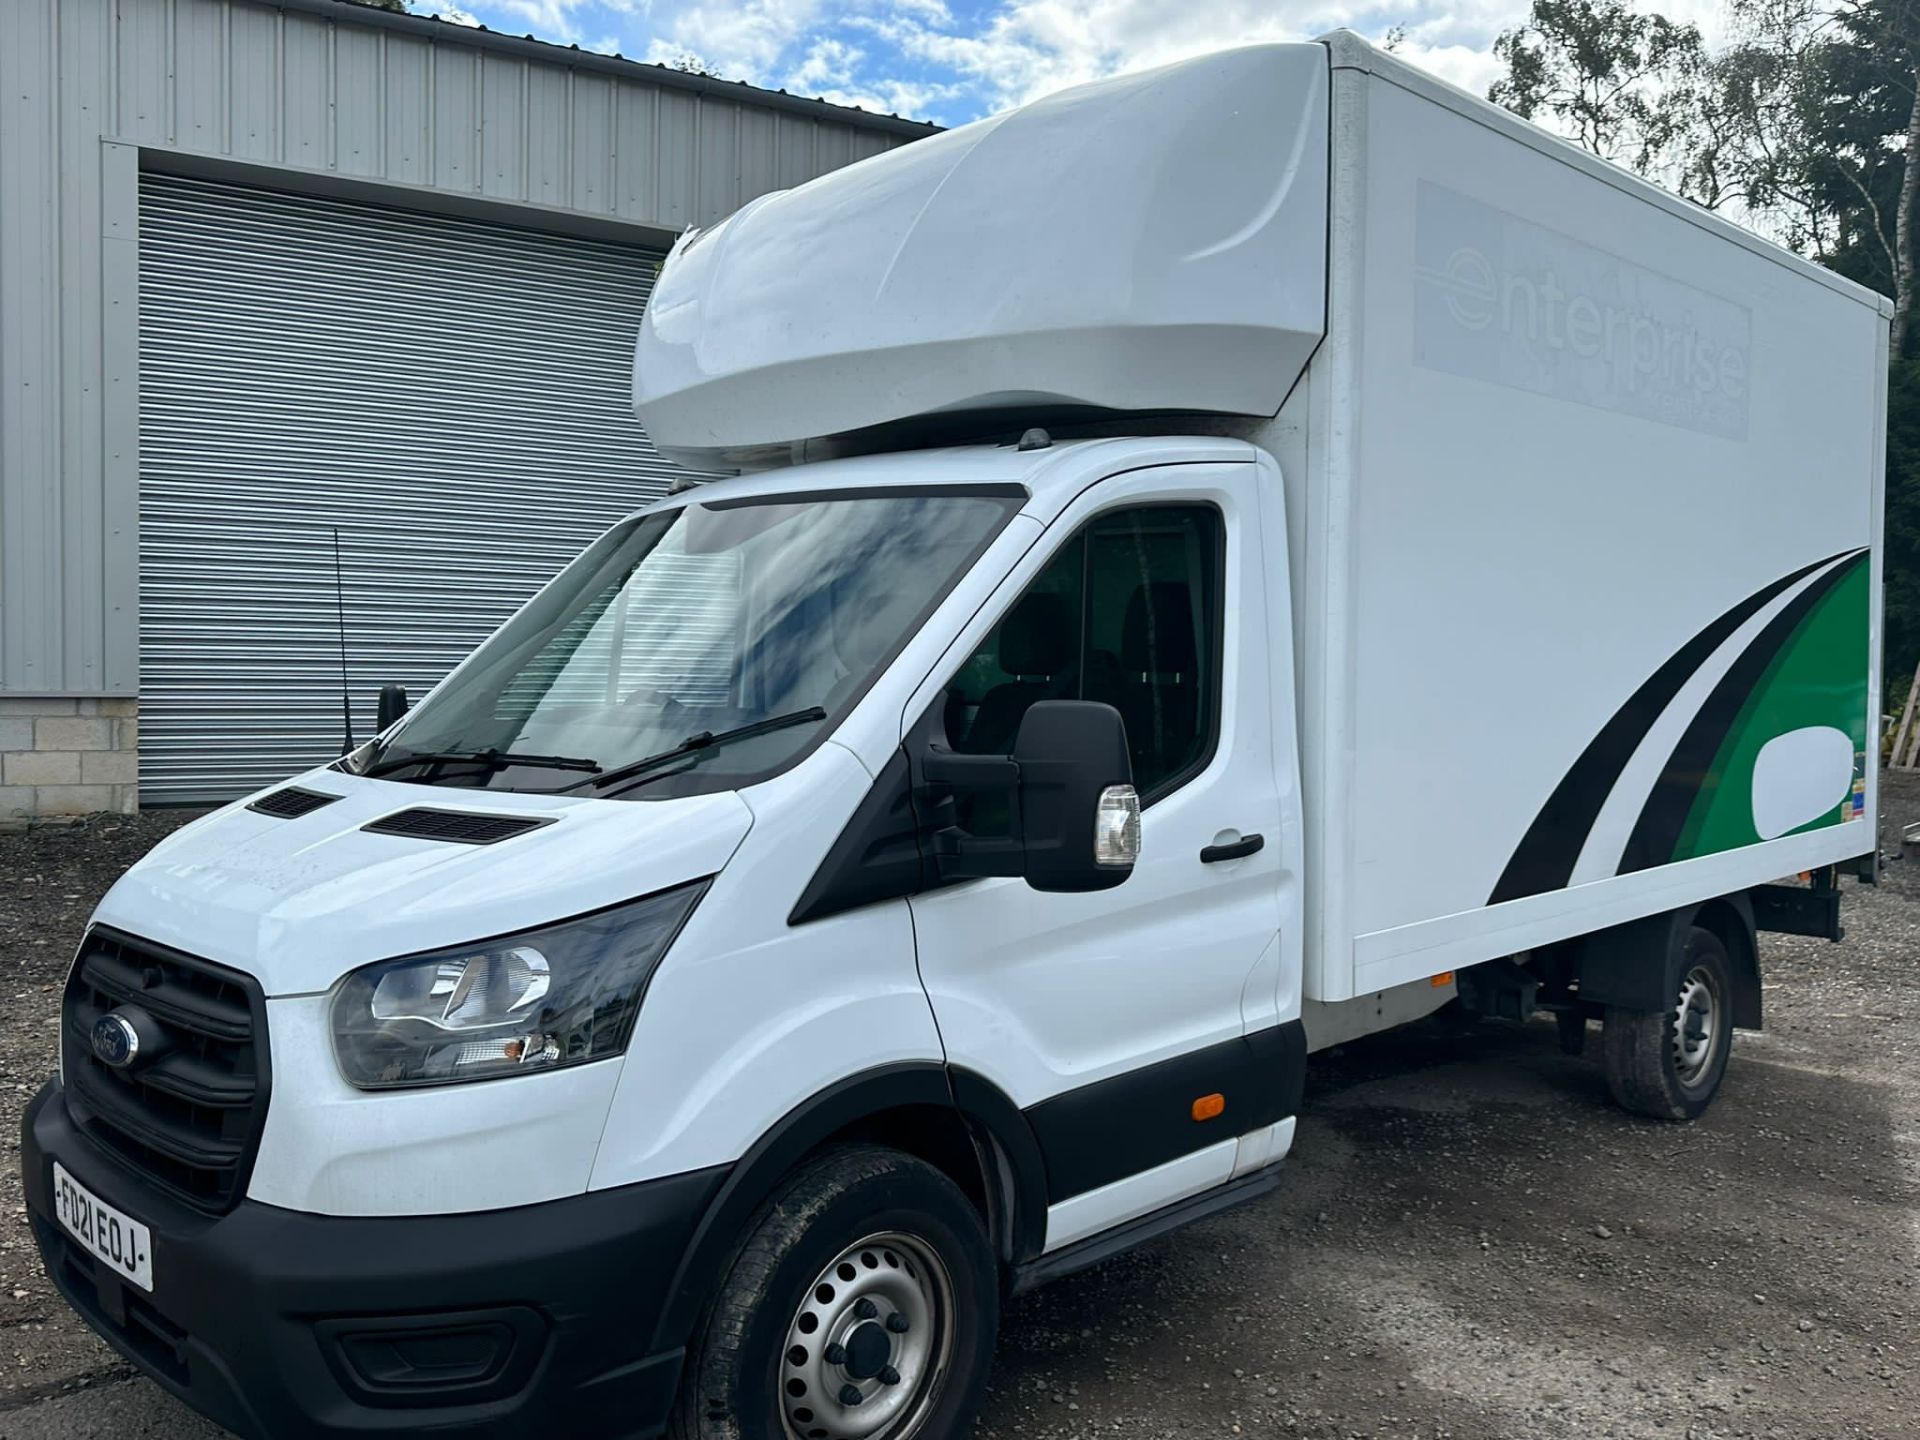 2021 21 ford Transit Luton - 47k miles - Lwb - Ideal recovery truck conversion - Image 3 of 8